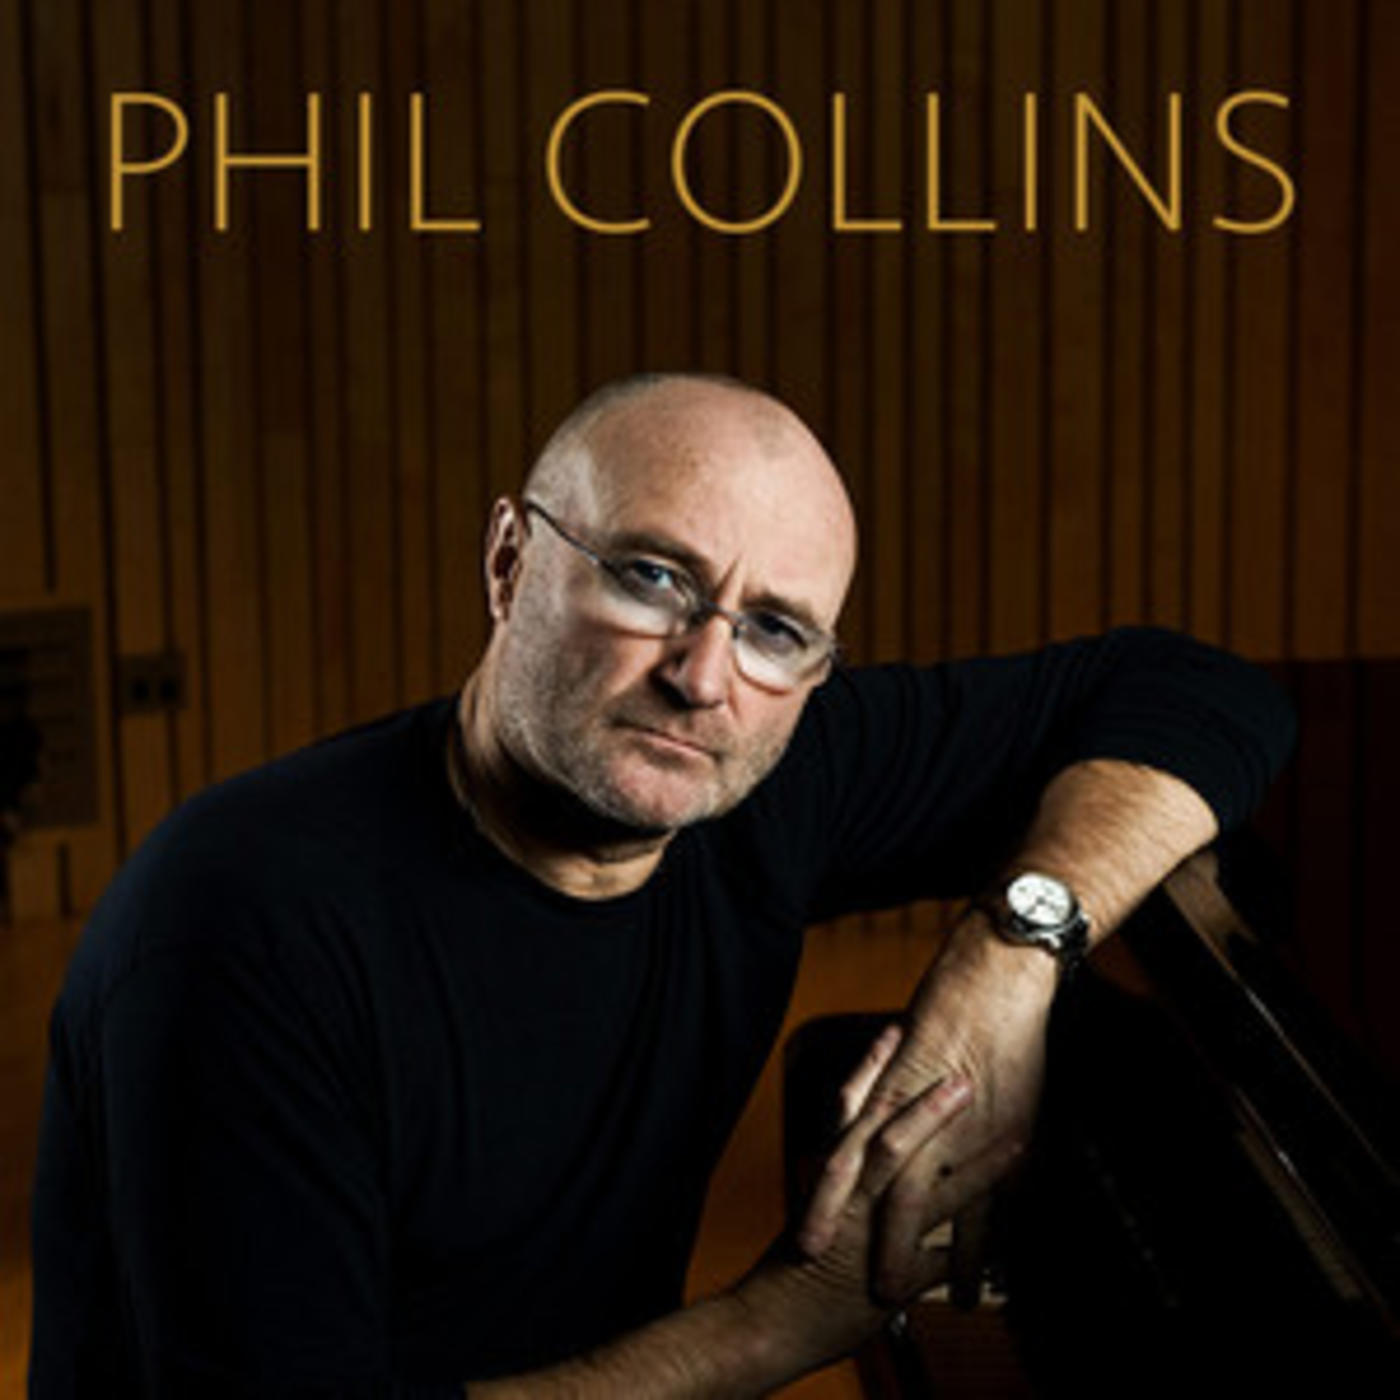 Official Phil Collins Playlist - In The Air Tonight, Easy Lover, One More Night, You Can't Hurry Love, Against All Odds, Two Hearts, I Missed Again, Groovy Kind of Love, True Colors, I Don't Care A...